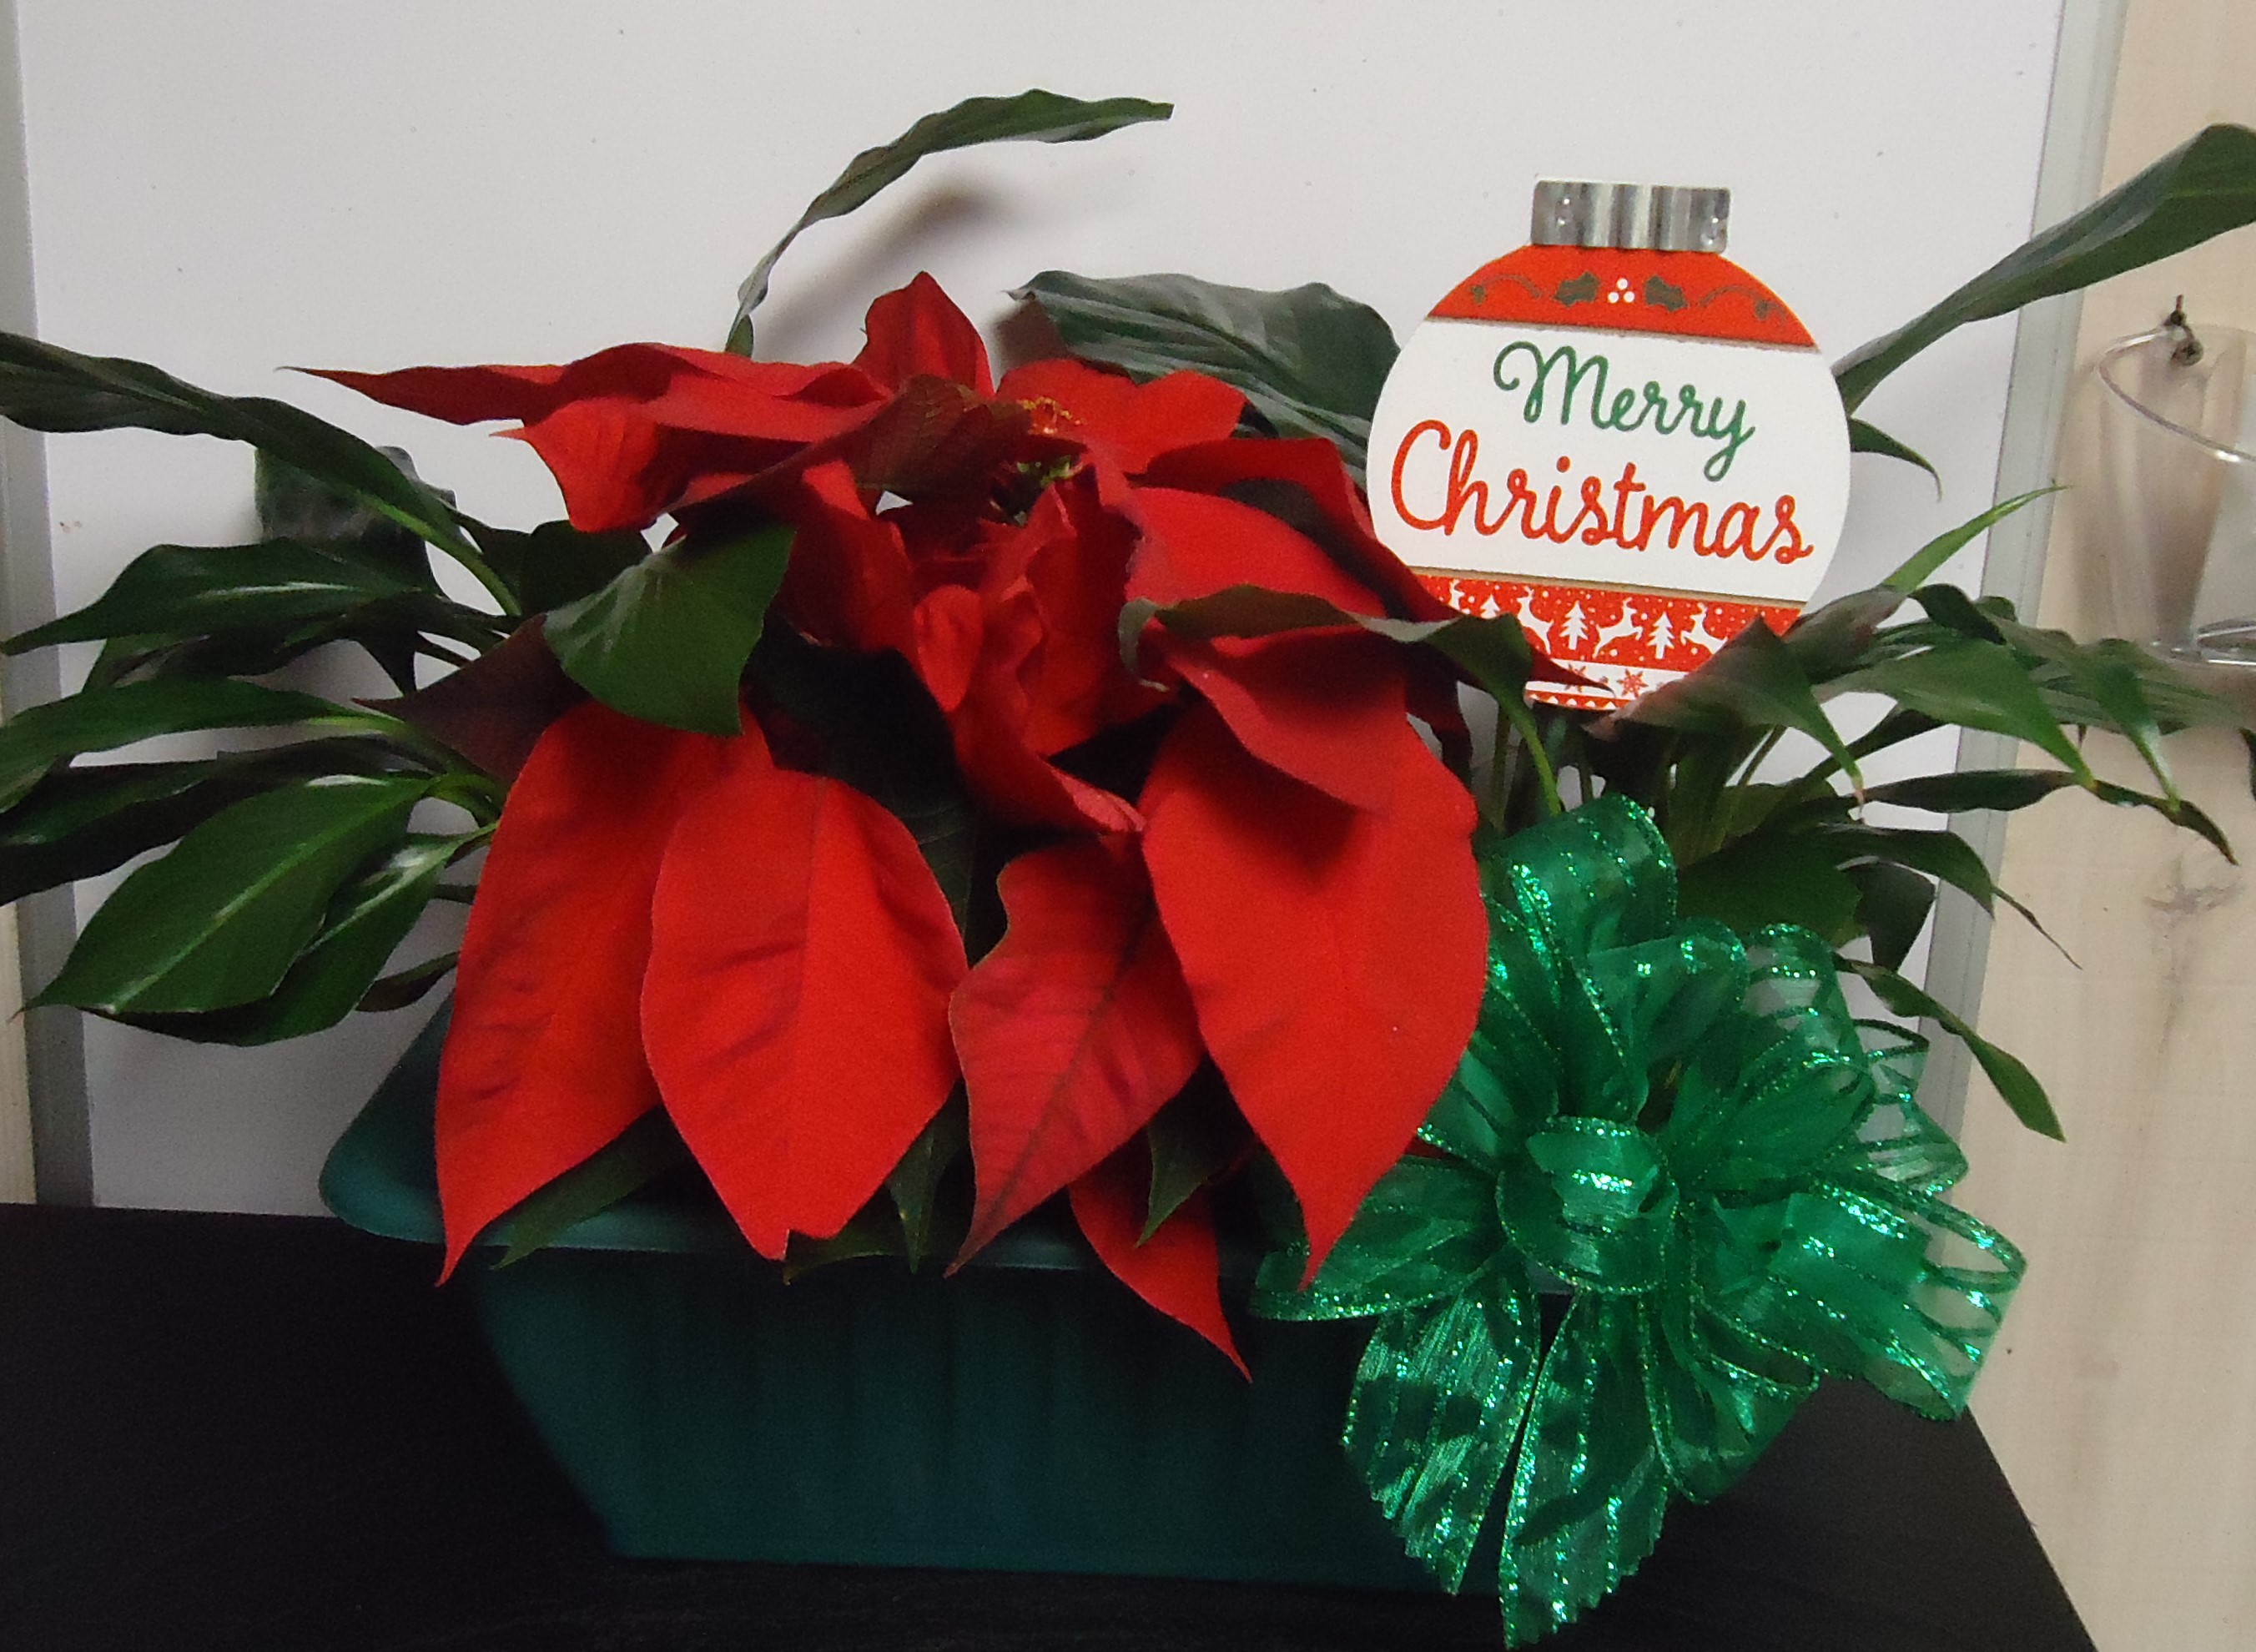 (1A) "Three" Plant Combo
W/ Merry Christmas Plaque
$50.00